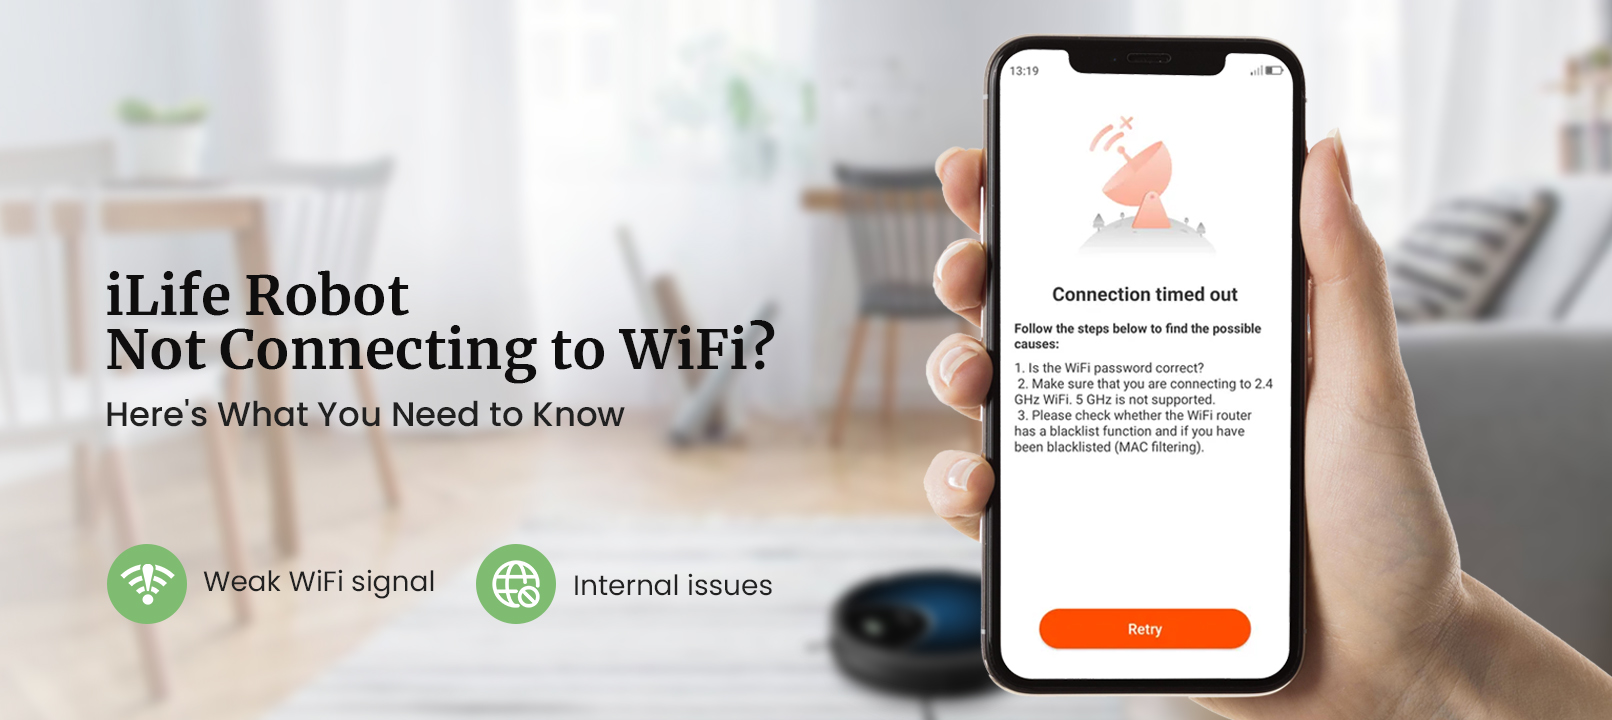 How to Fix iLife Robot Not Connecting to WiFi